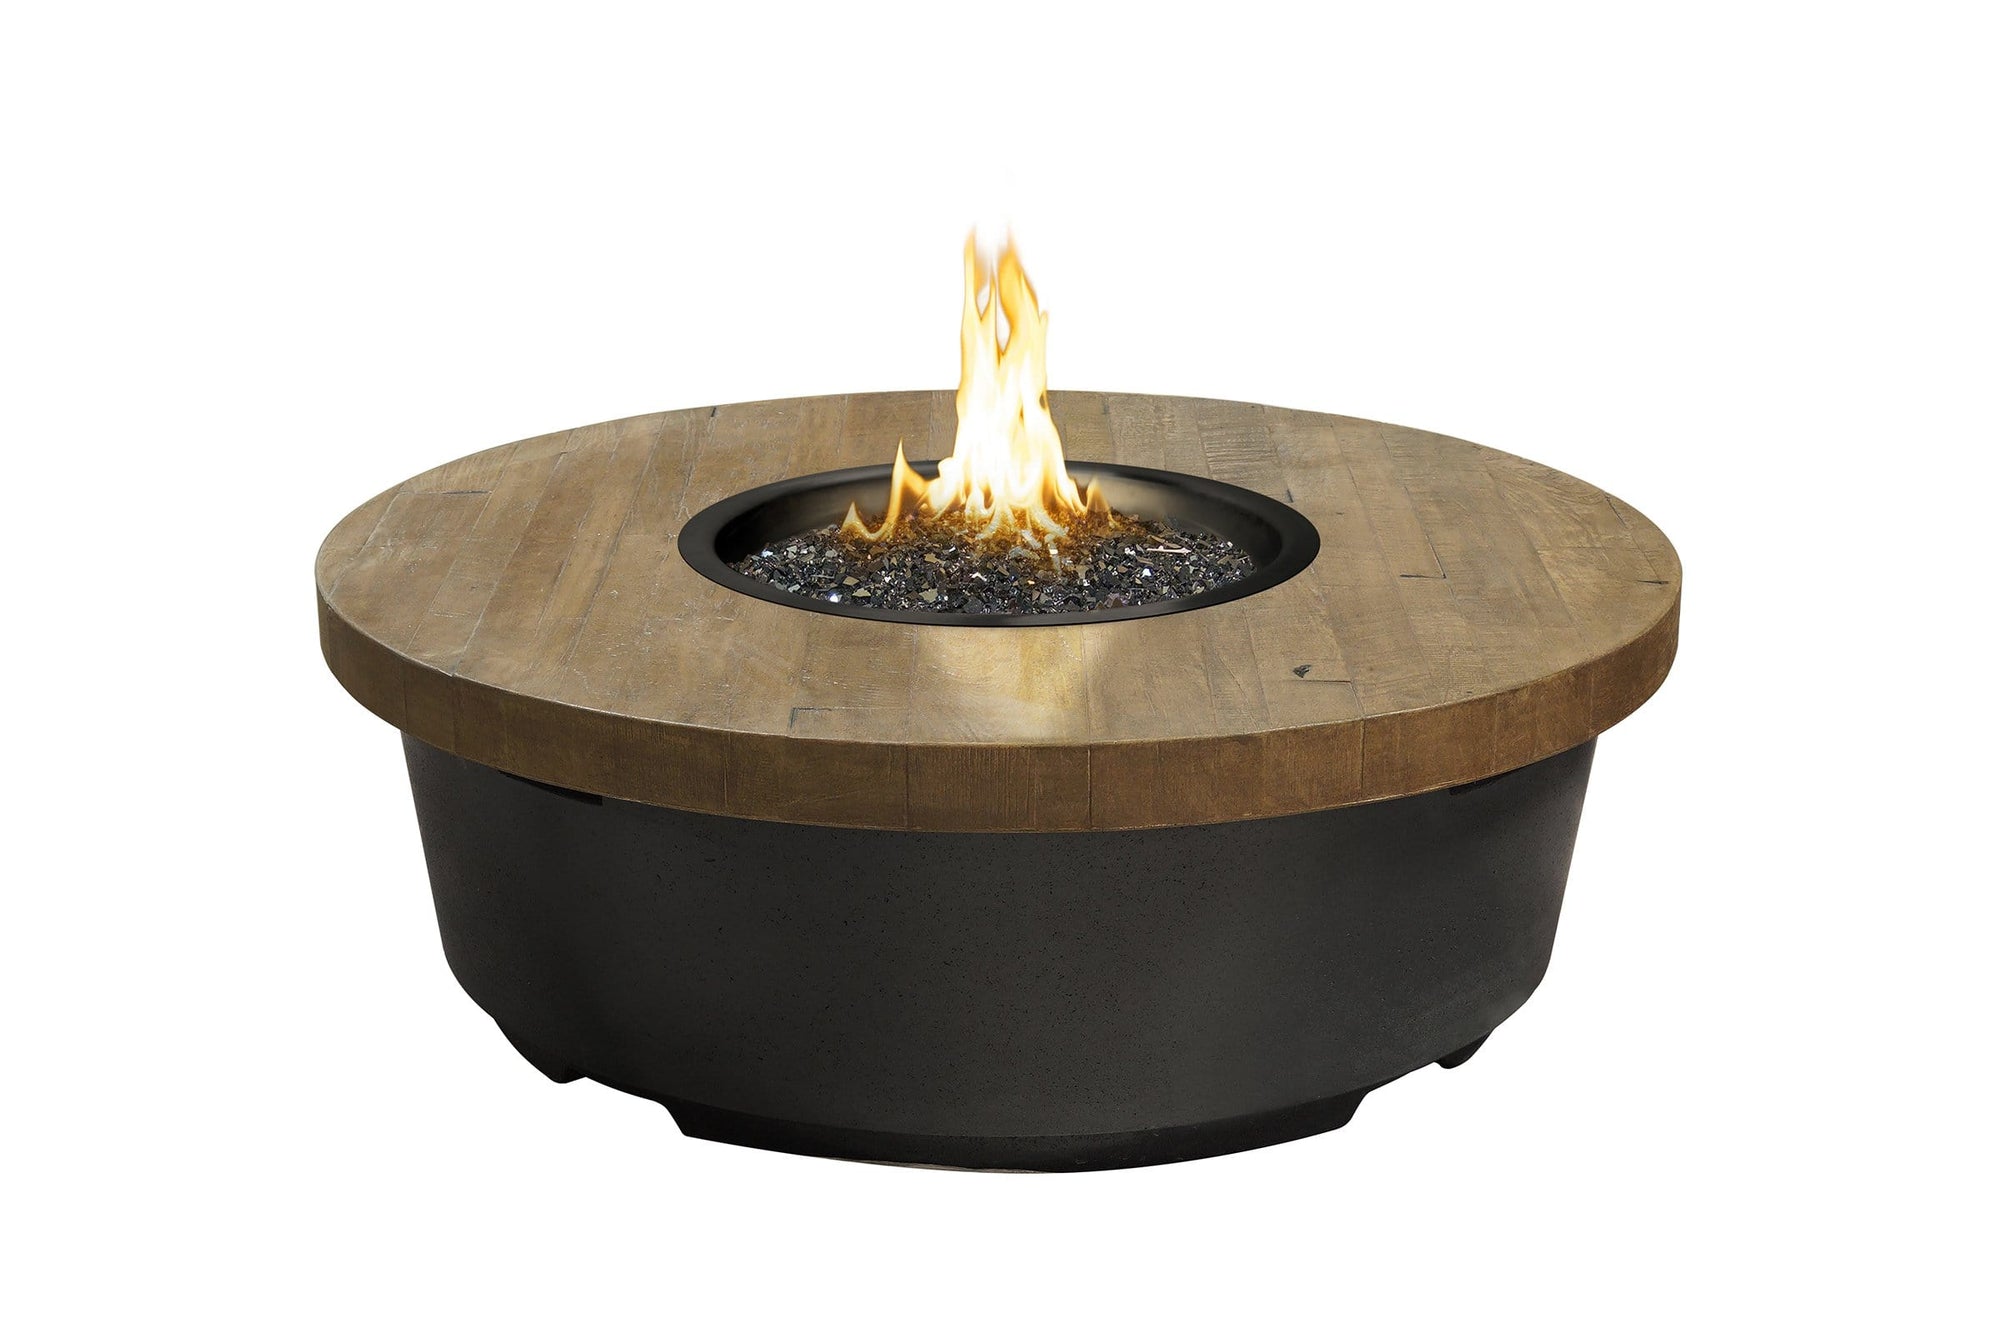 American Fyre Designs Fire Features French Barrel Oak / Natural Gas / Manual Ignition System American Fyre Designs 47" Reclaimed Wood Contempo Round Gas Firetable / French Barrel Oak or Silver Pine / 782-BA-FO-M2NC, 782-BA-FO-M2PC, 782-BA-SP-M2NC, 782-BA-SP-M2PC, 782-BA-FO-F2NC, 782-BA-FO-F2PC, 782-BA-SP-F2NC, 782-BA-SP-F2PC